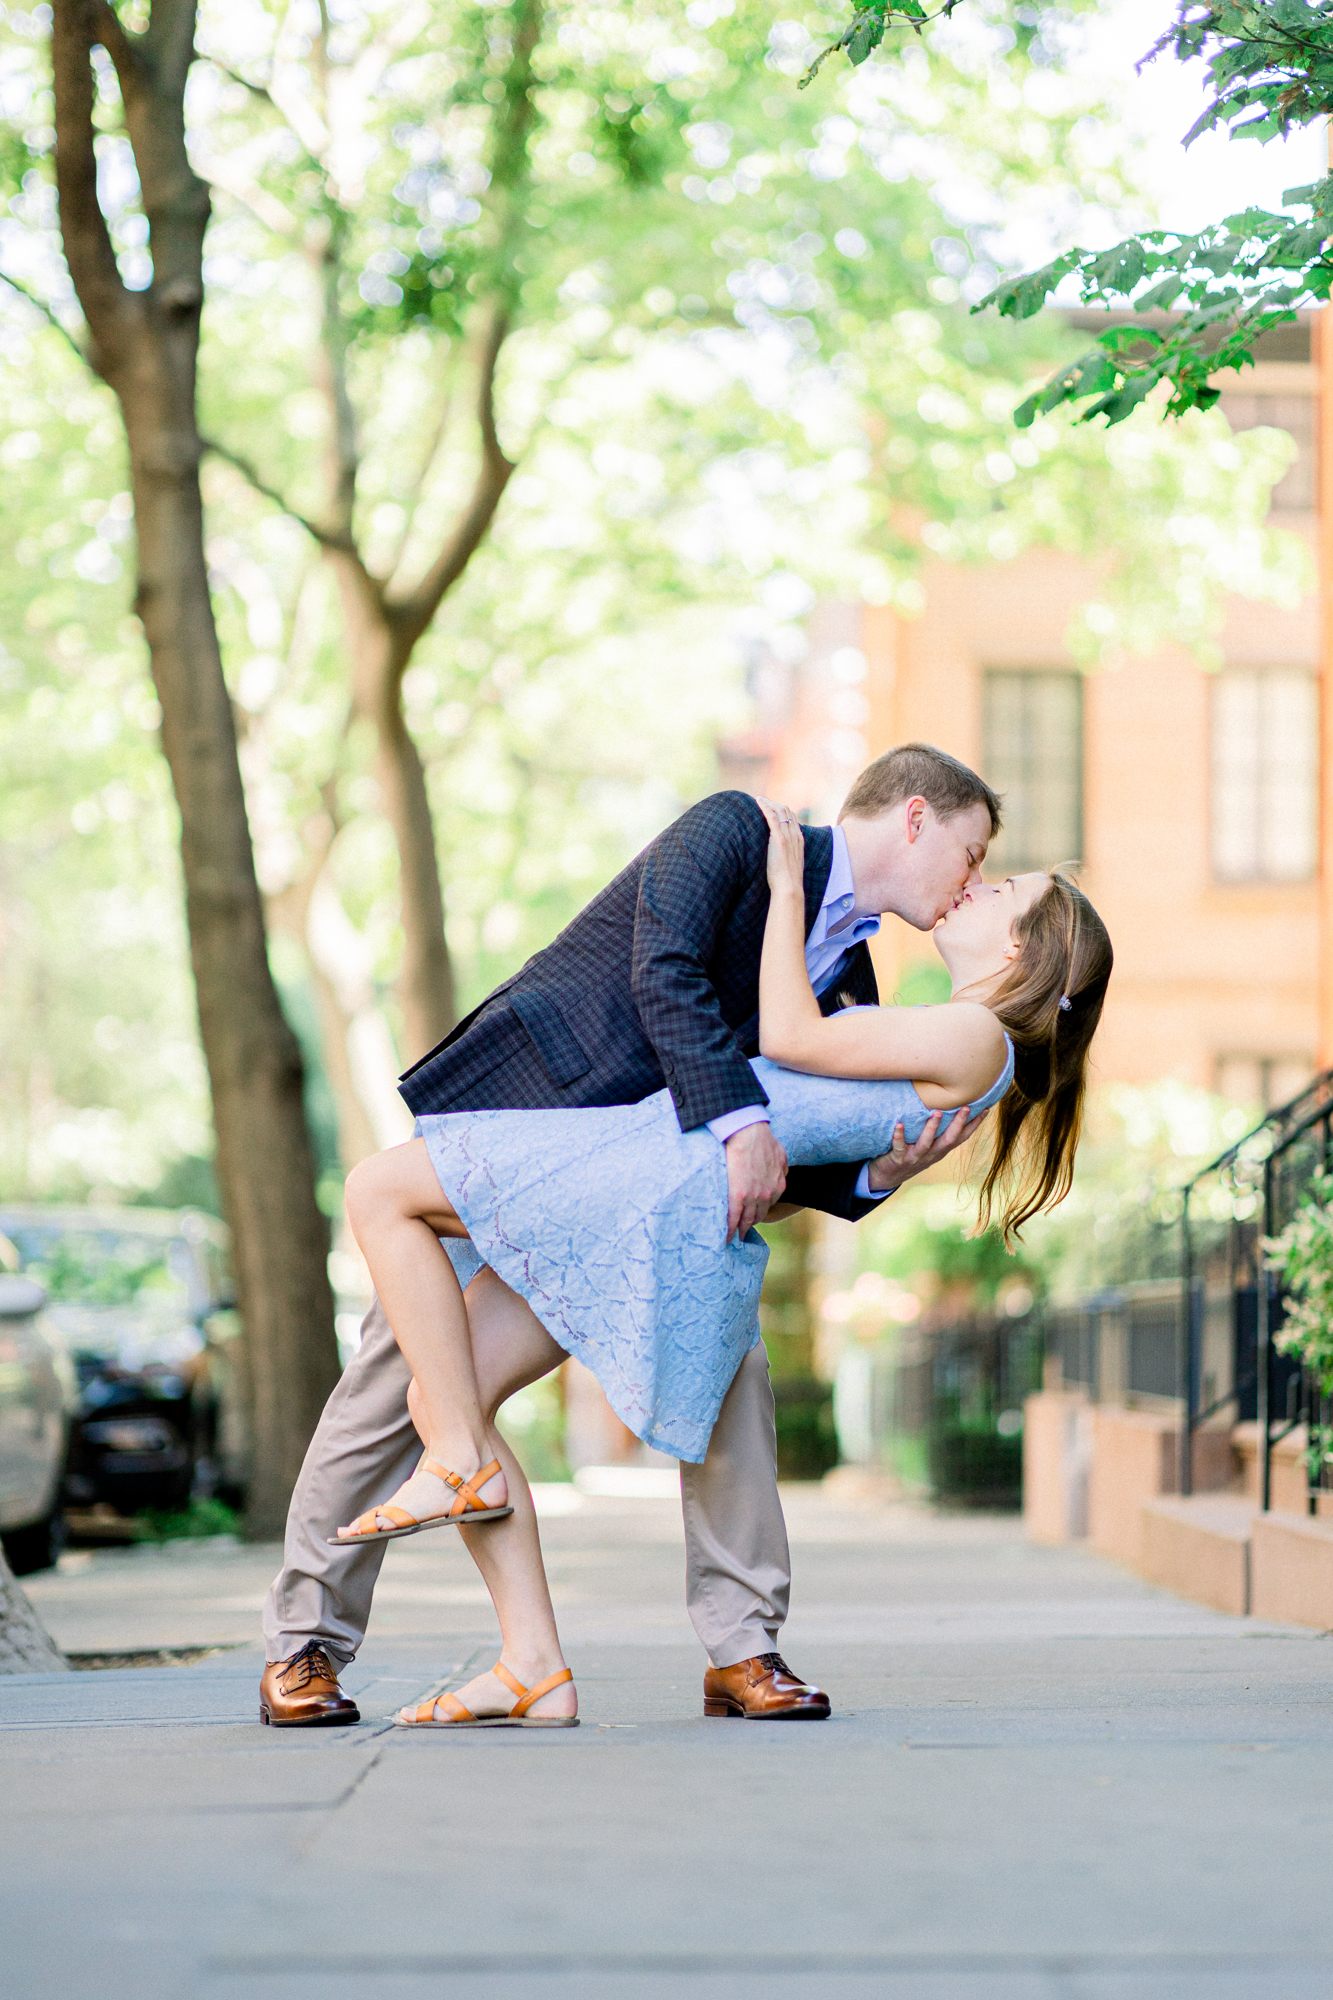 Playful Brooklyn Heights Promenade Engagement Photography